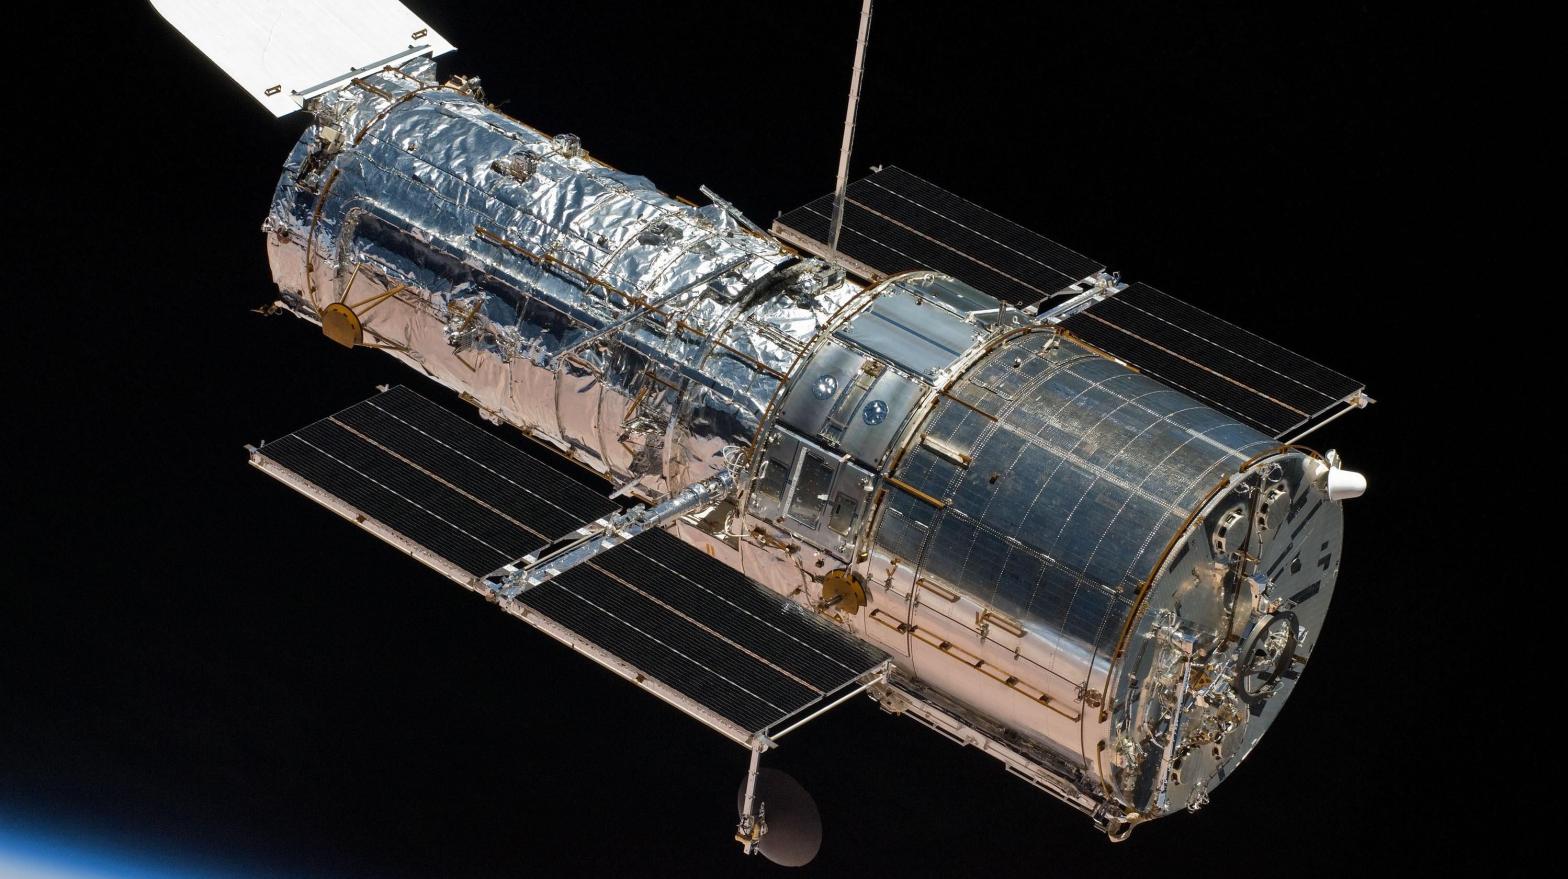 A photo of the Hubble Space Telescope captured by an astronaut aboard the space shuttle Atlantis in 2009. (Photo: NASA)